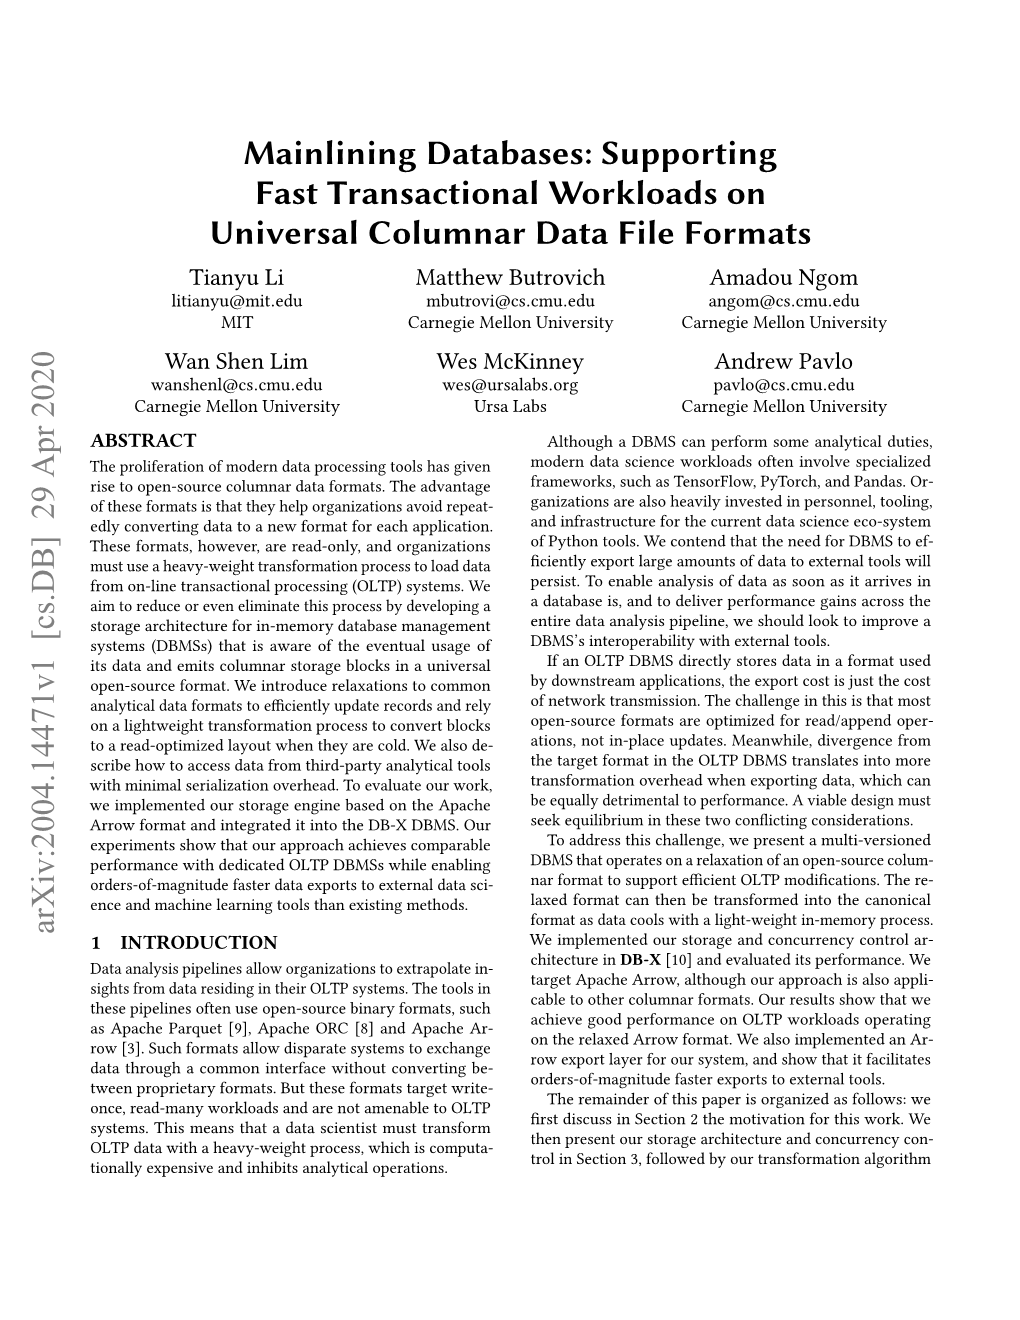 Supporting Fast Transactional Workloads on Universal Columnar